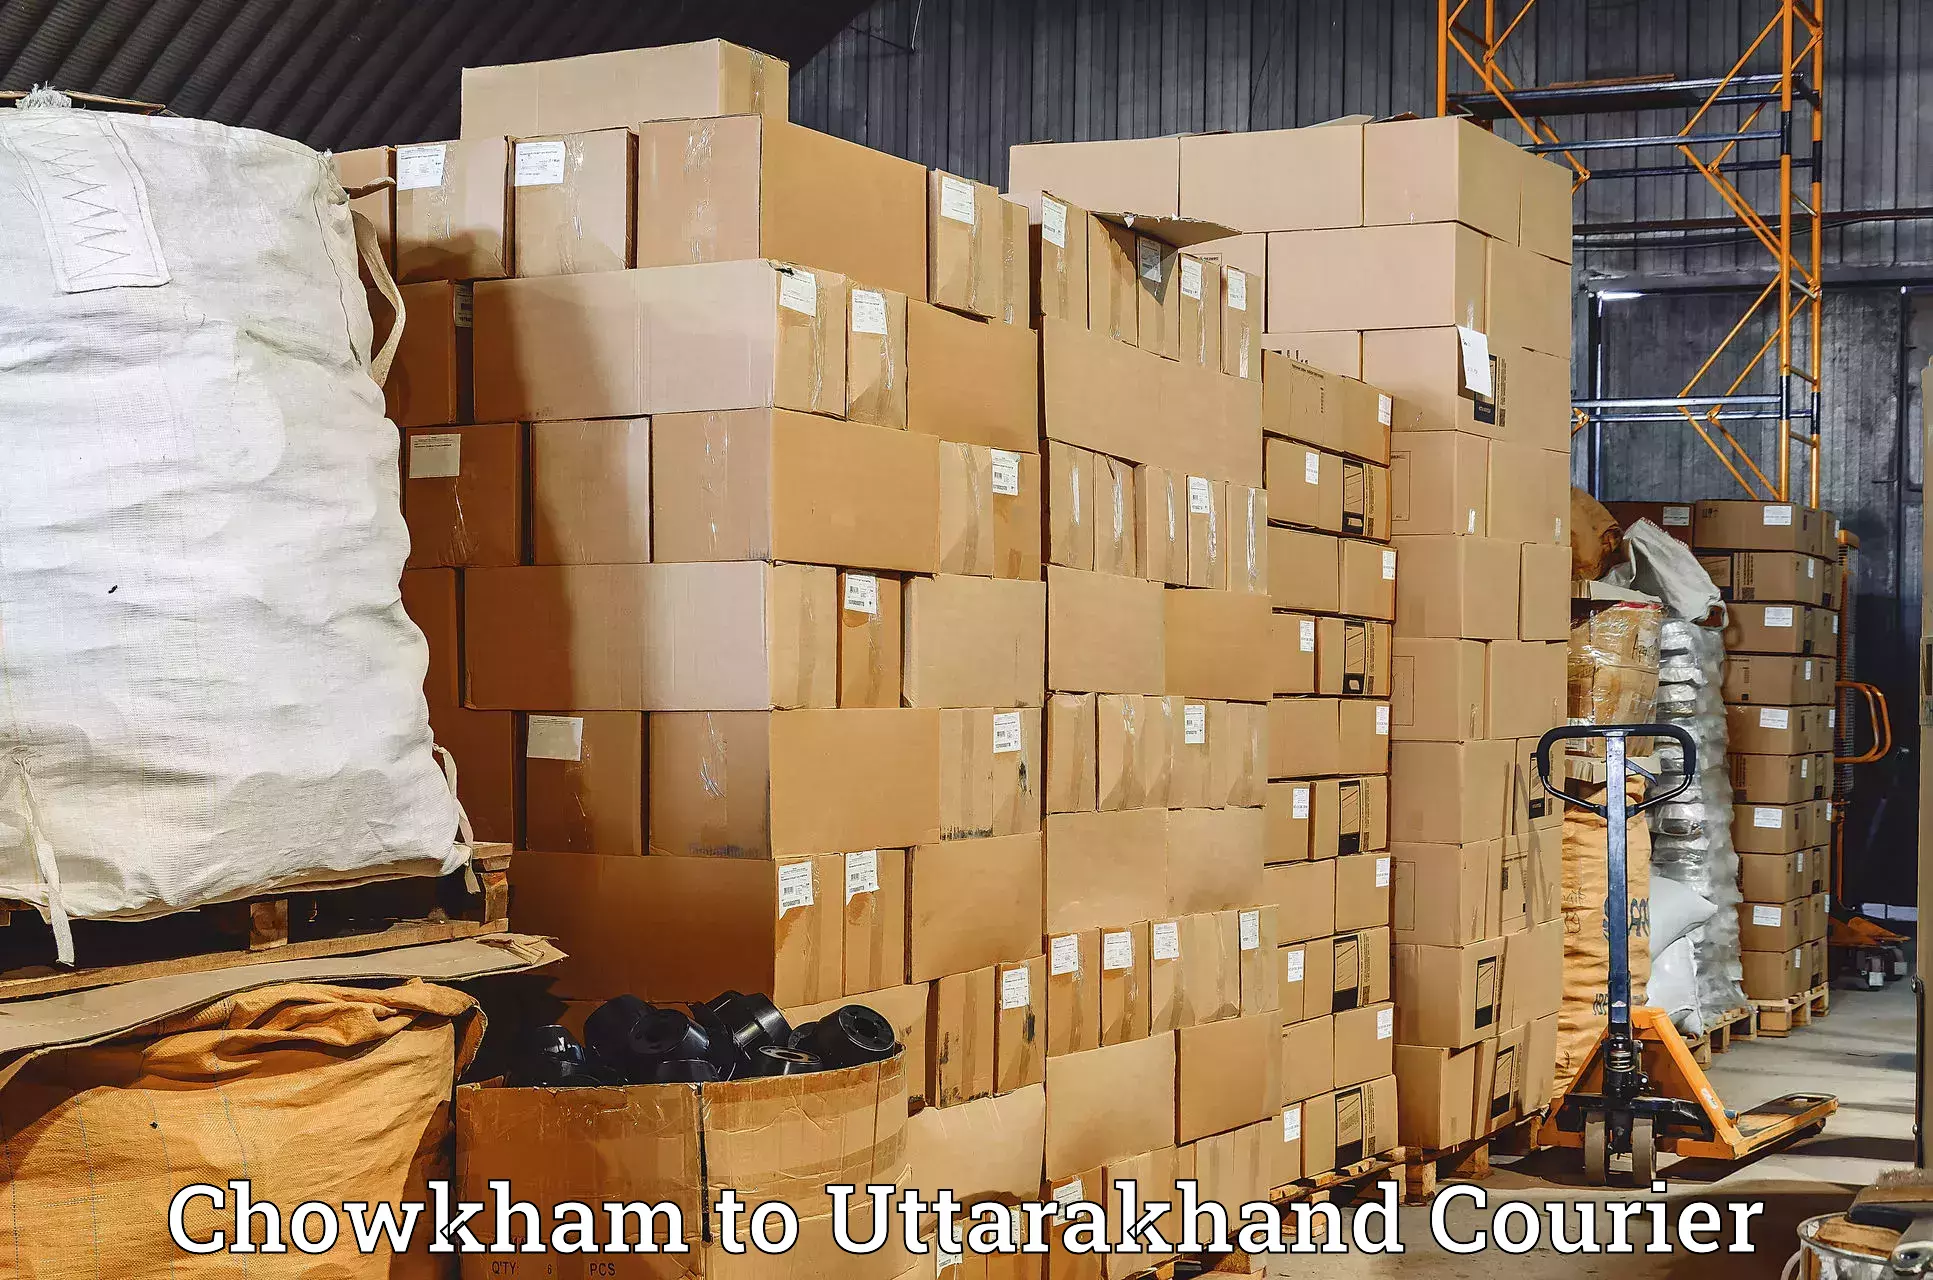 Doorstep parcel pickup in Chowkham to Champawat